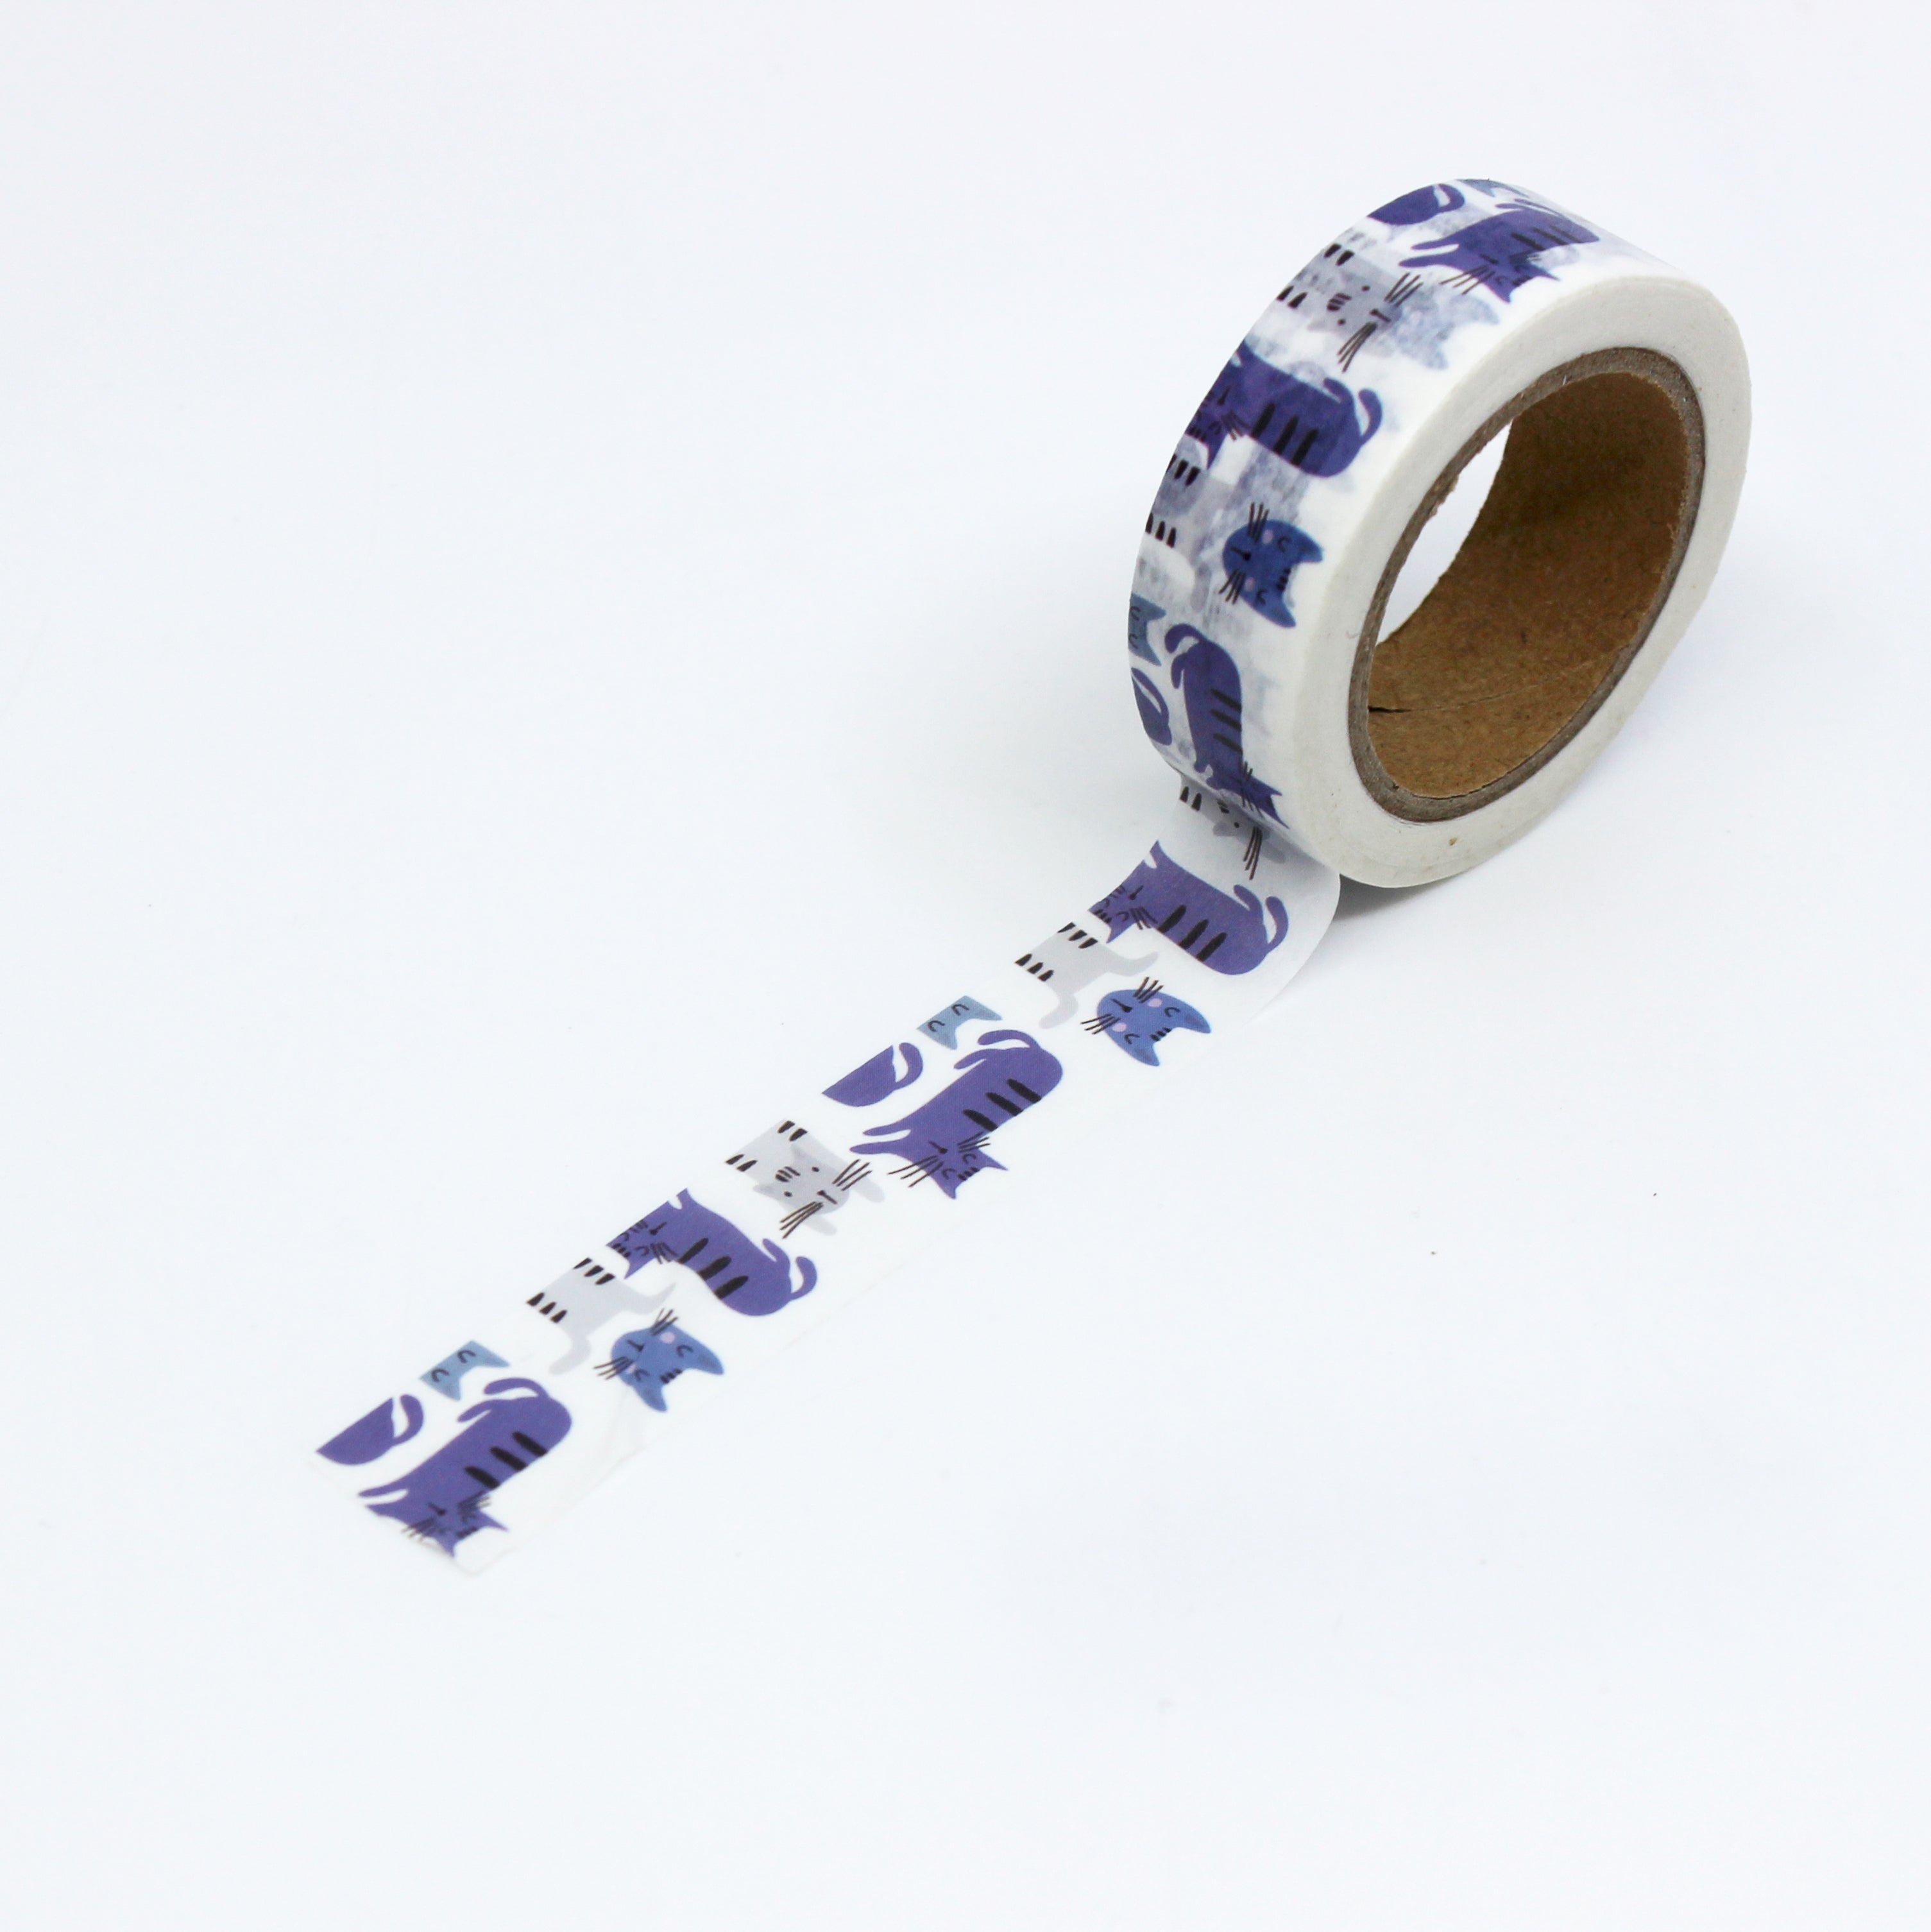 Infuse your crafts with cool feline vibes using our Cool Blue Cat Washi Tape, featuring a stylish cat design in calming shades of blue. Perfect for adding a touch of sophistication to your projects. This tape is sold at BBB Supplies Craft Shop.